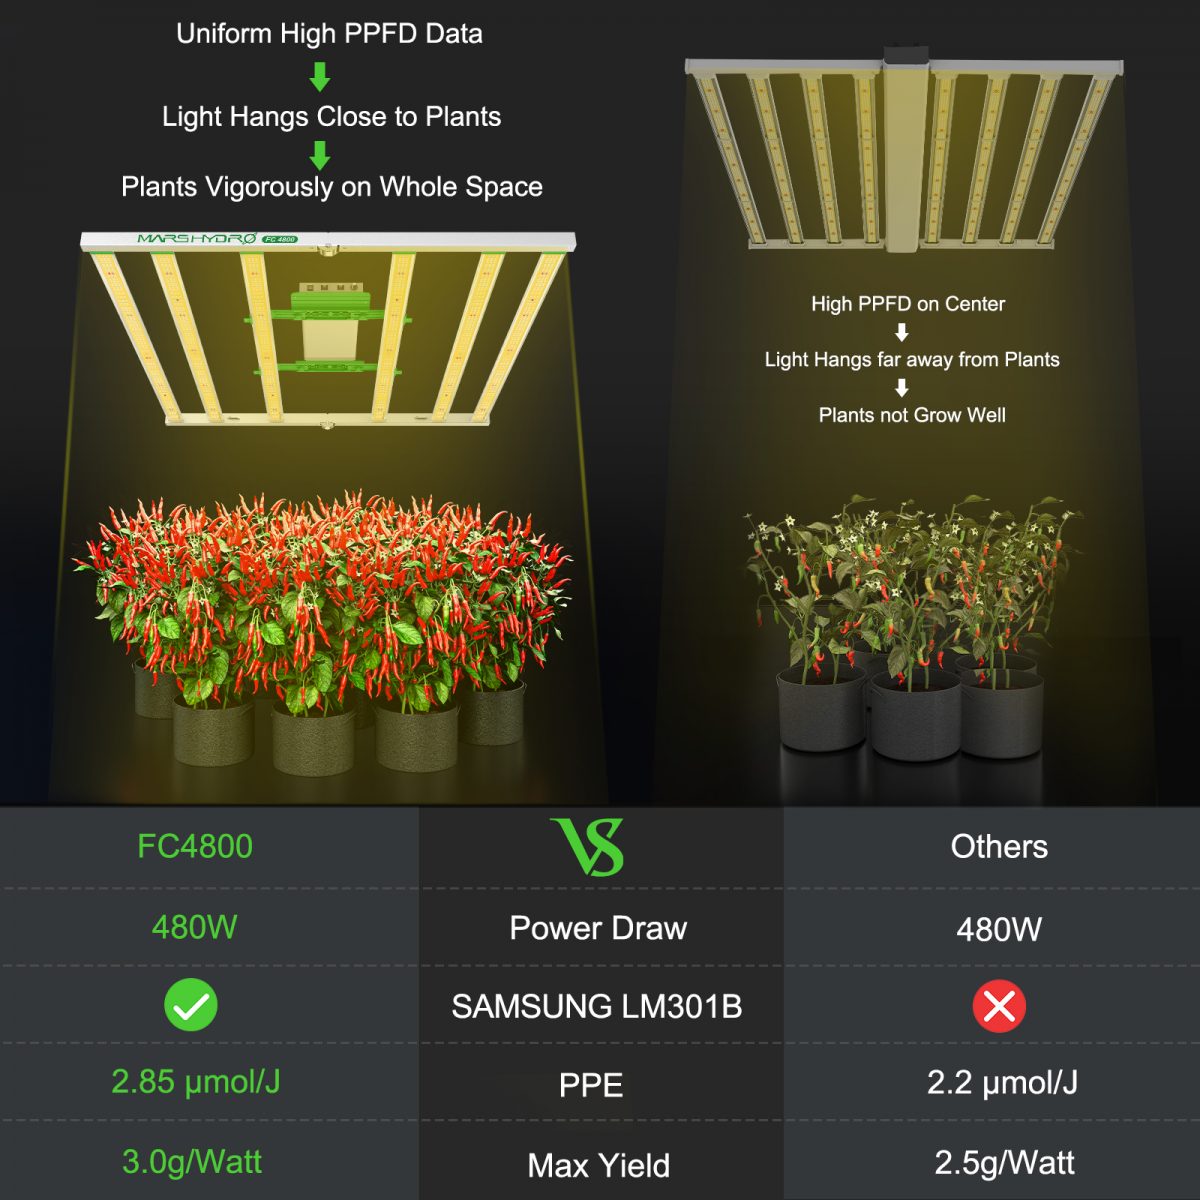 Powered By Samsung LM301B Diodes: The Mars Hydro FC 4800 480-watt LED grow light is installed with high-performance Samsung LM301B chips, the top-bin horticultural diodes, to provide a high Photosynthetic photon efficacy efficiency of 2.85 μmol/j and a long-lasting color rendering capability, supporting indoor plants to grow and thrive.